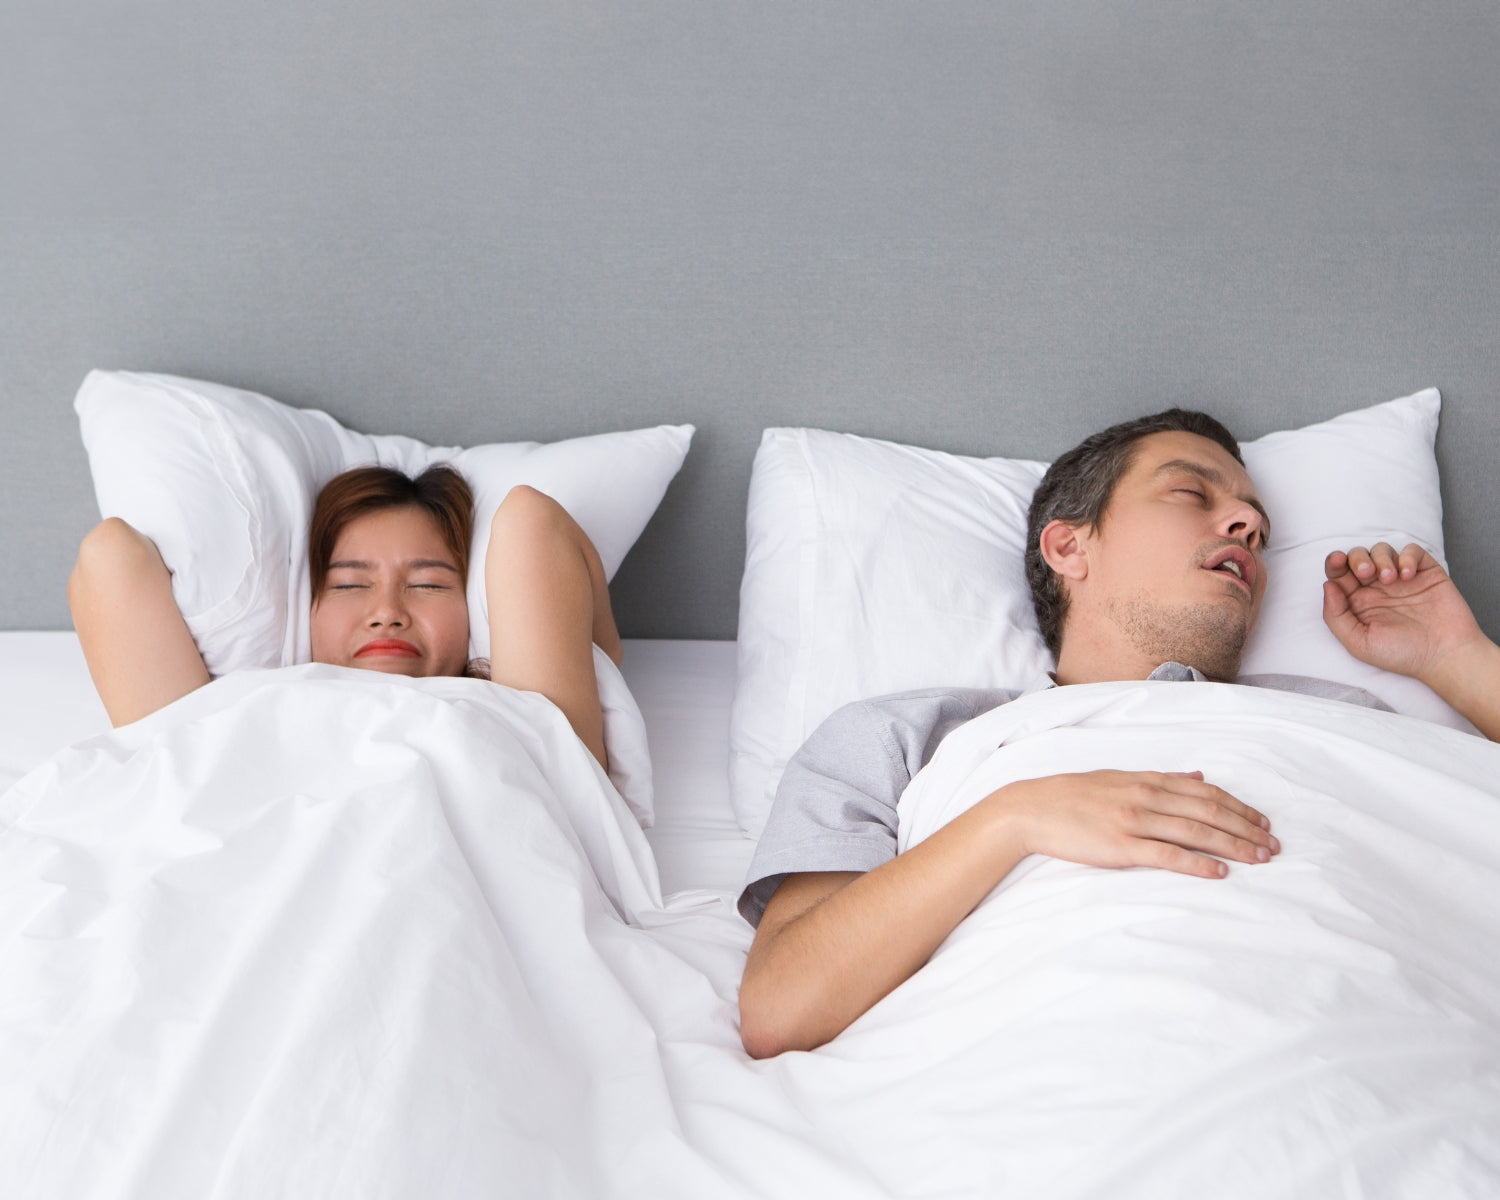 Anti-snore pillows